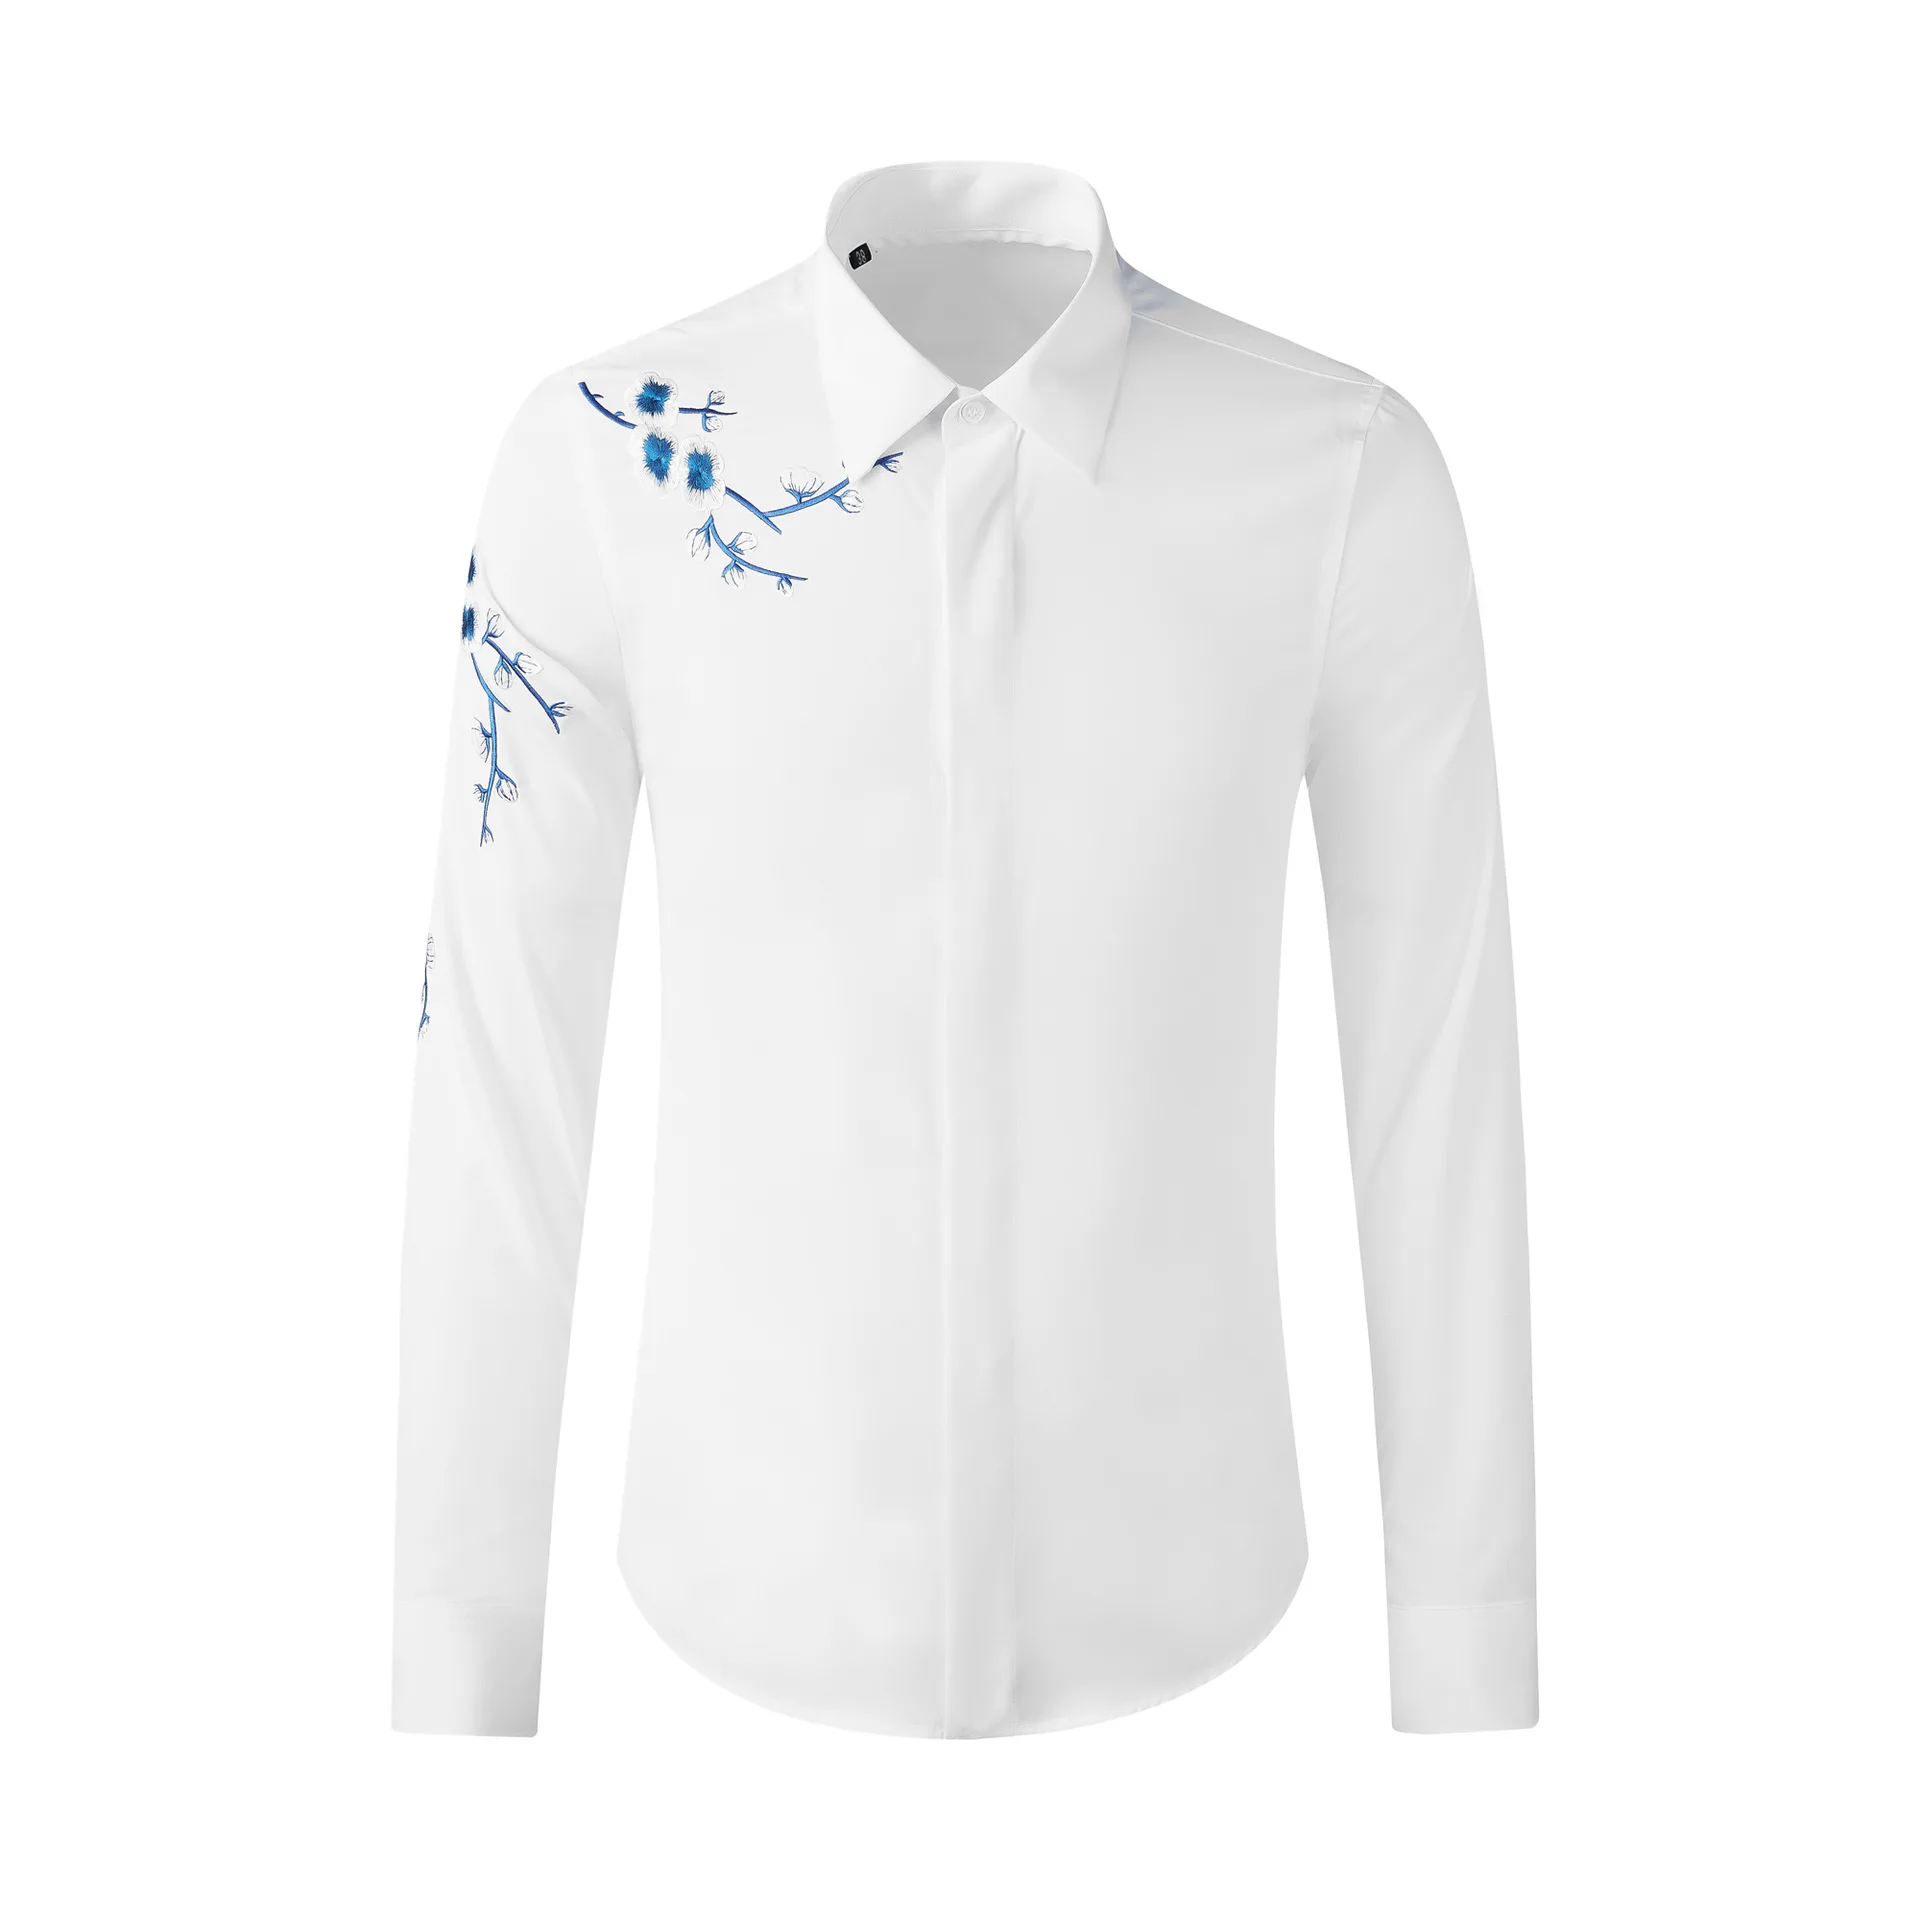 2021 autumn and winter Chinese style plum blossom embroidery long-sleeved men's shirt tide brand shirt men's clothing